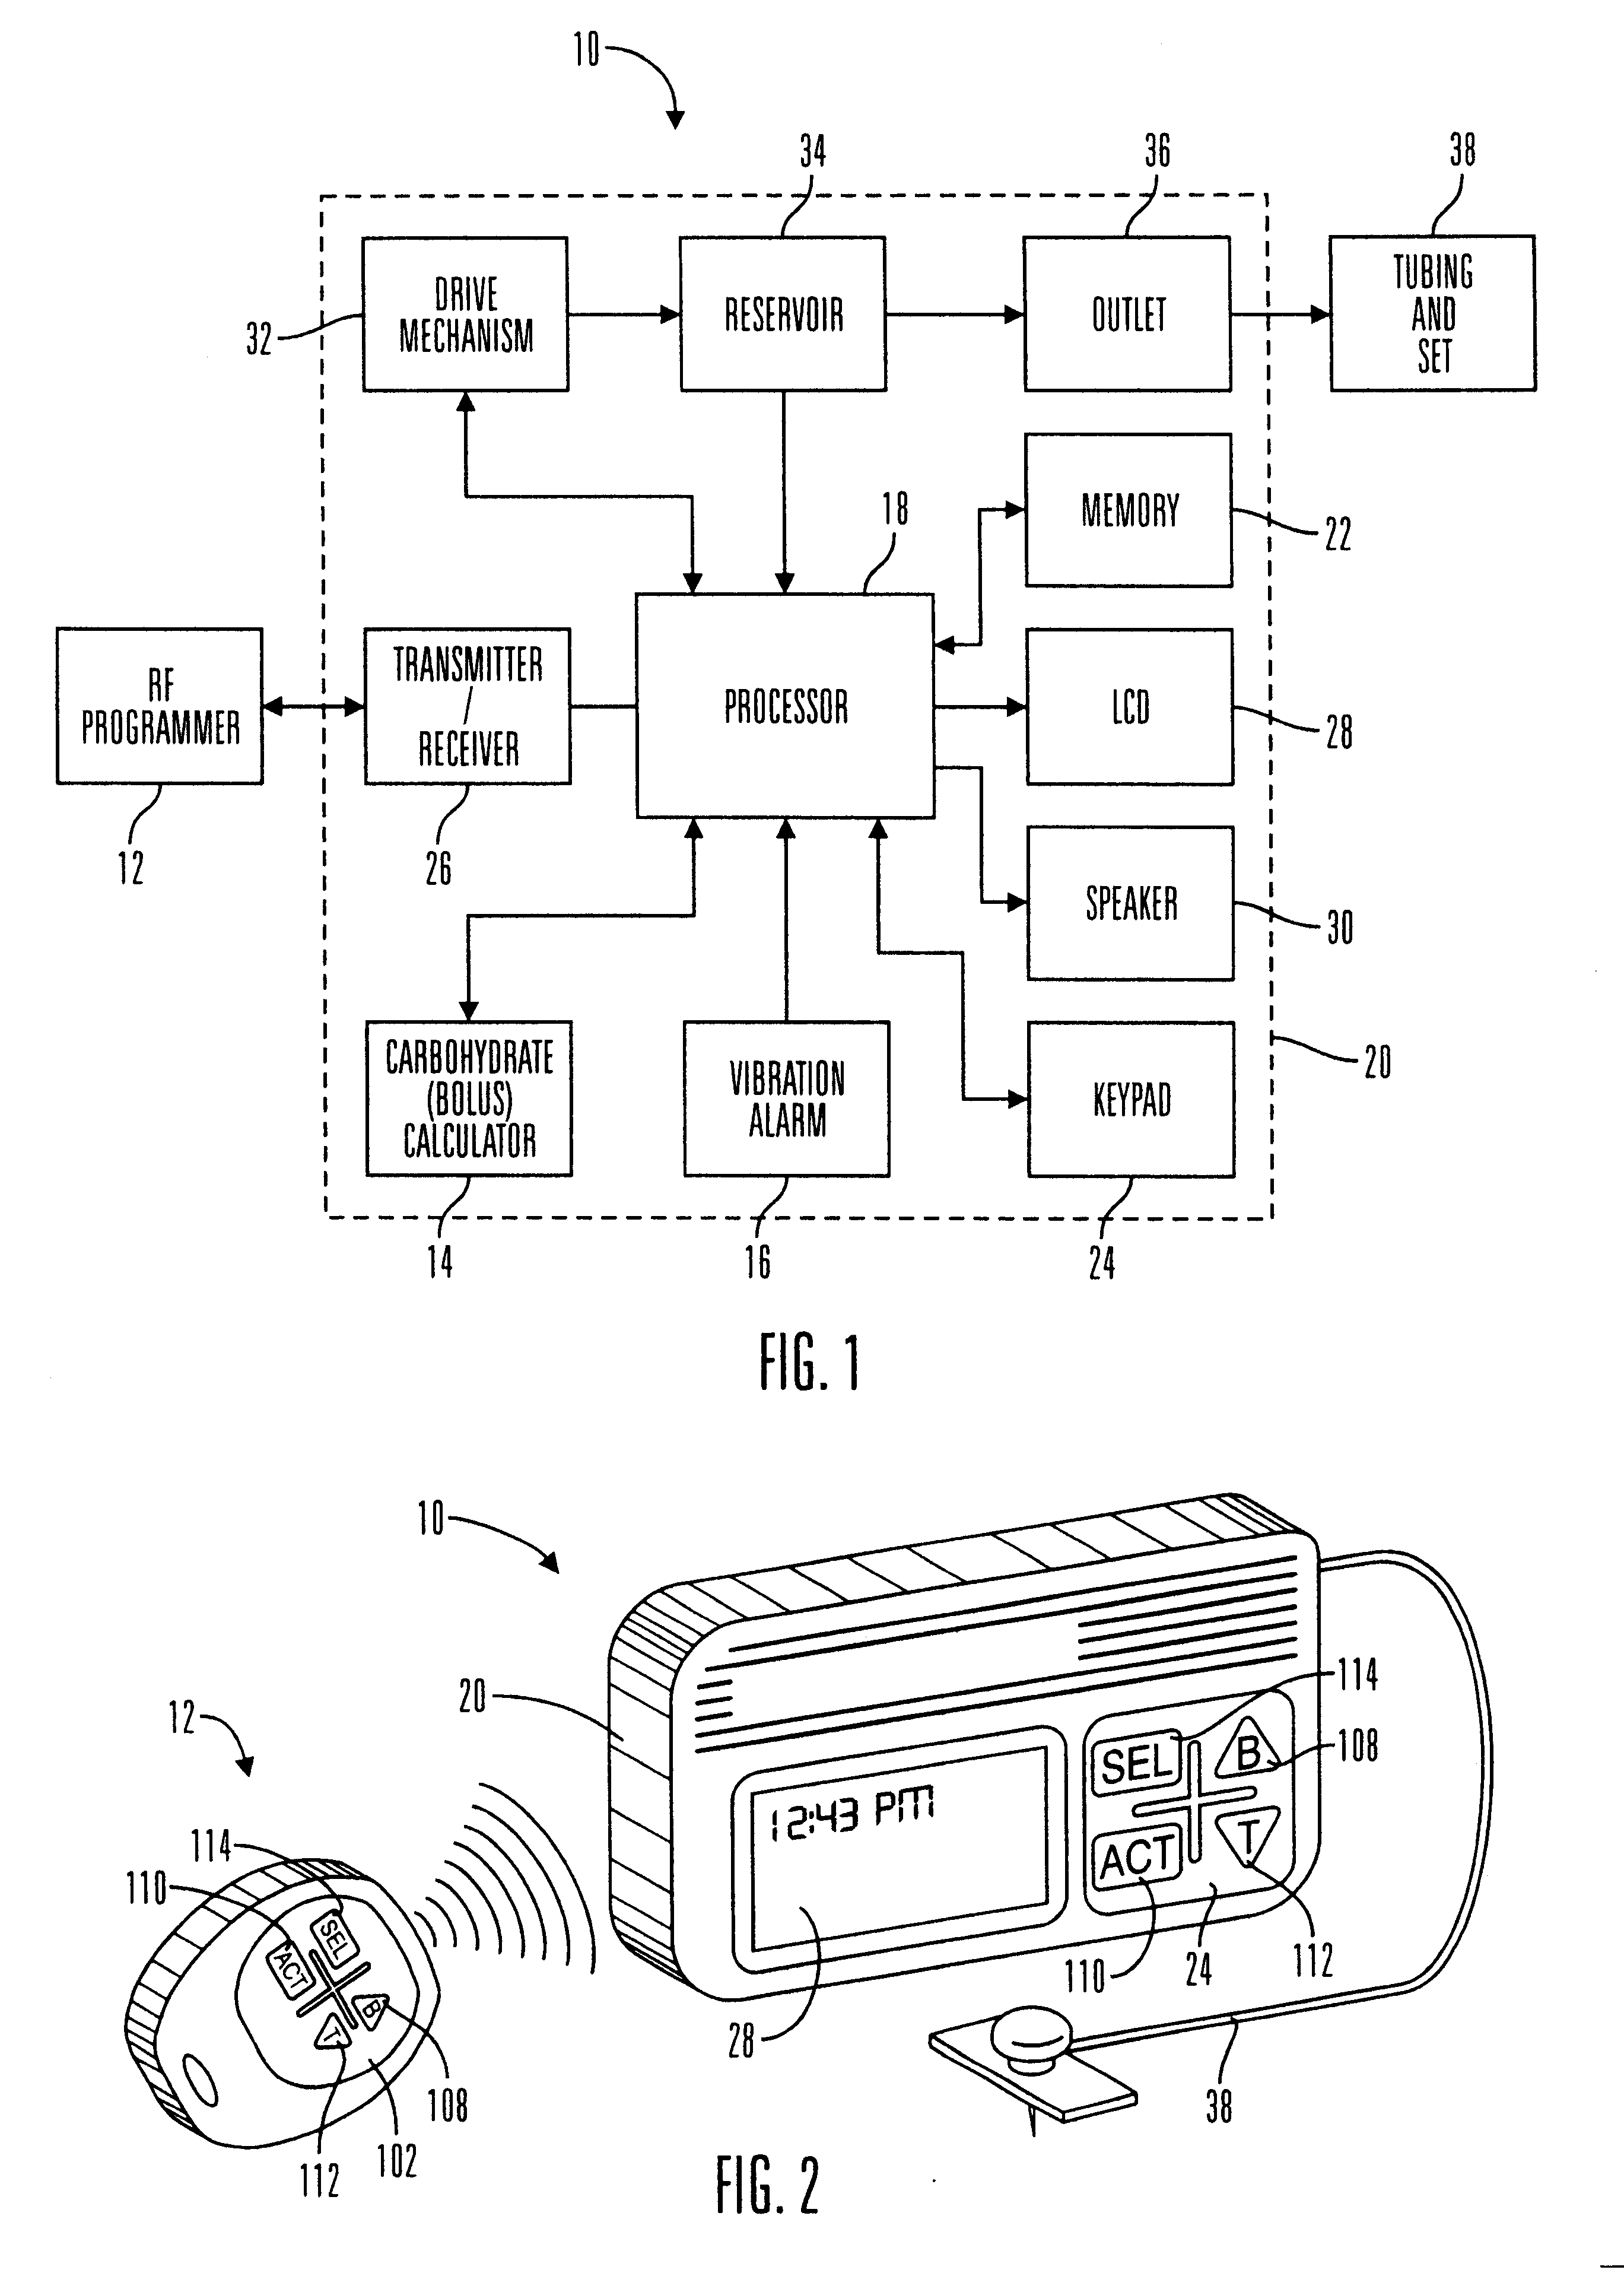 External infusion device with remote programming bolus estimator and/or vibration alarm capabilities